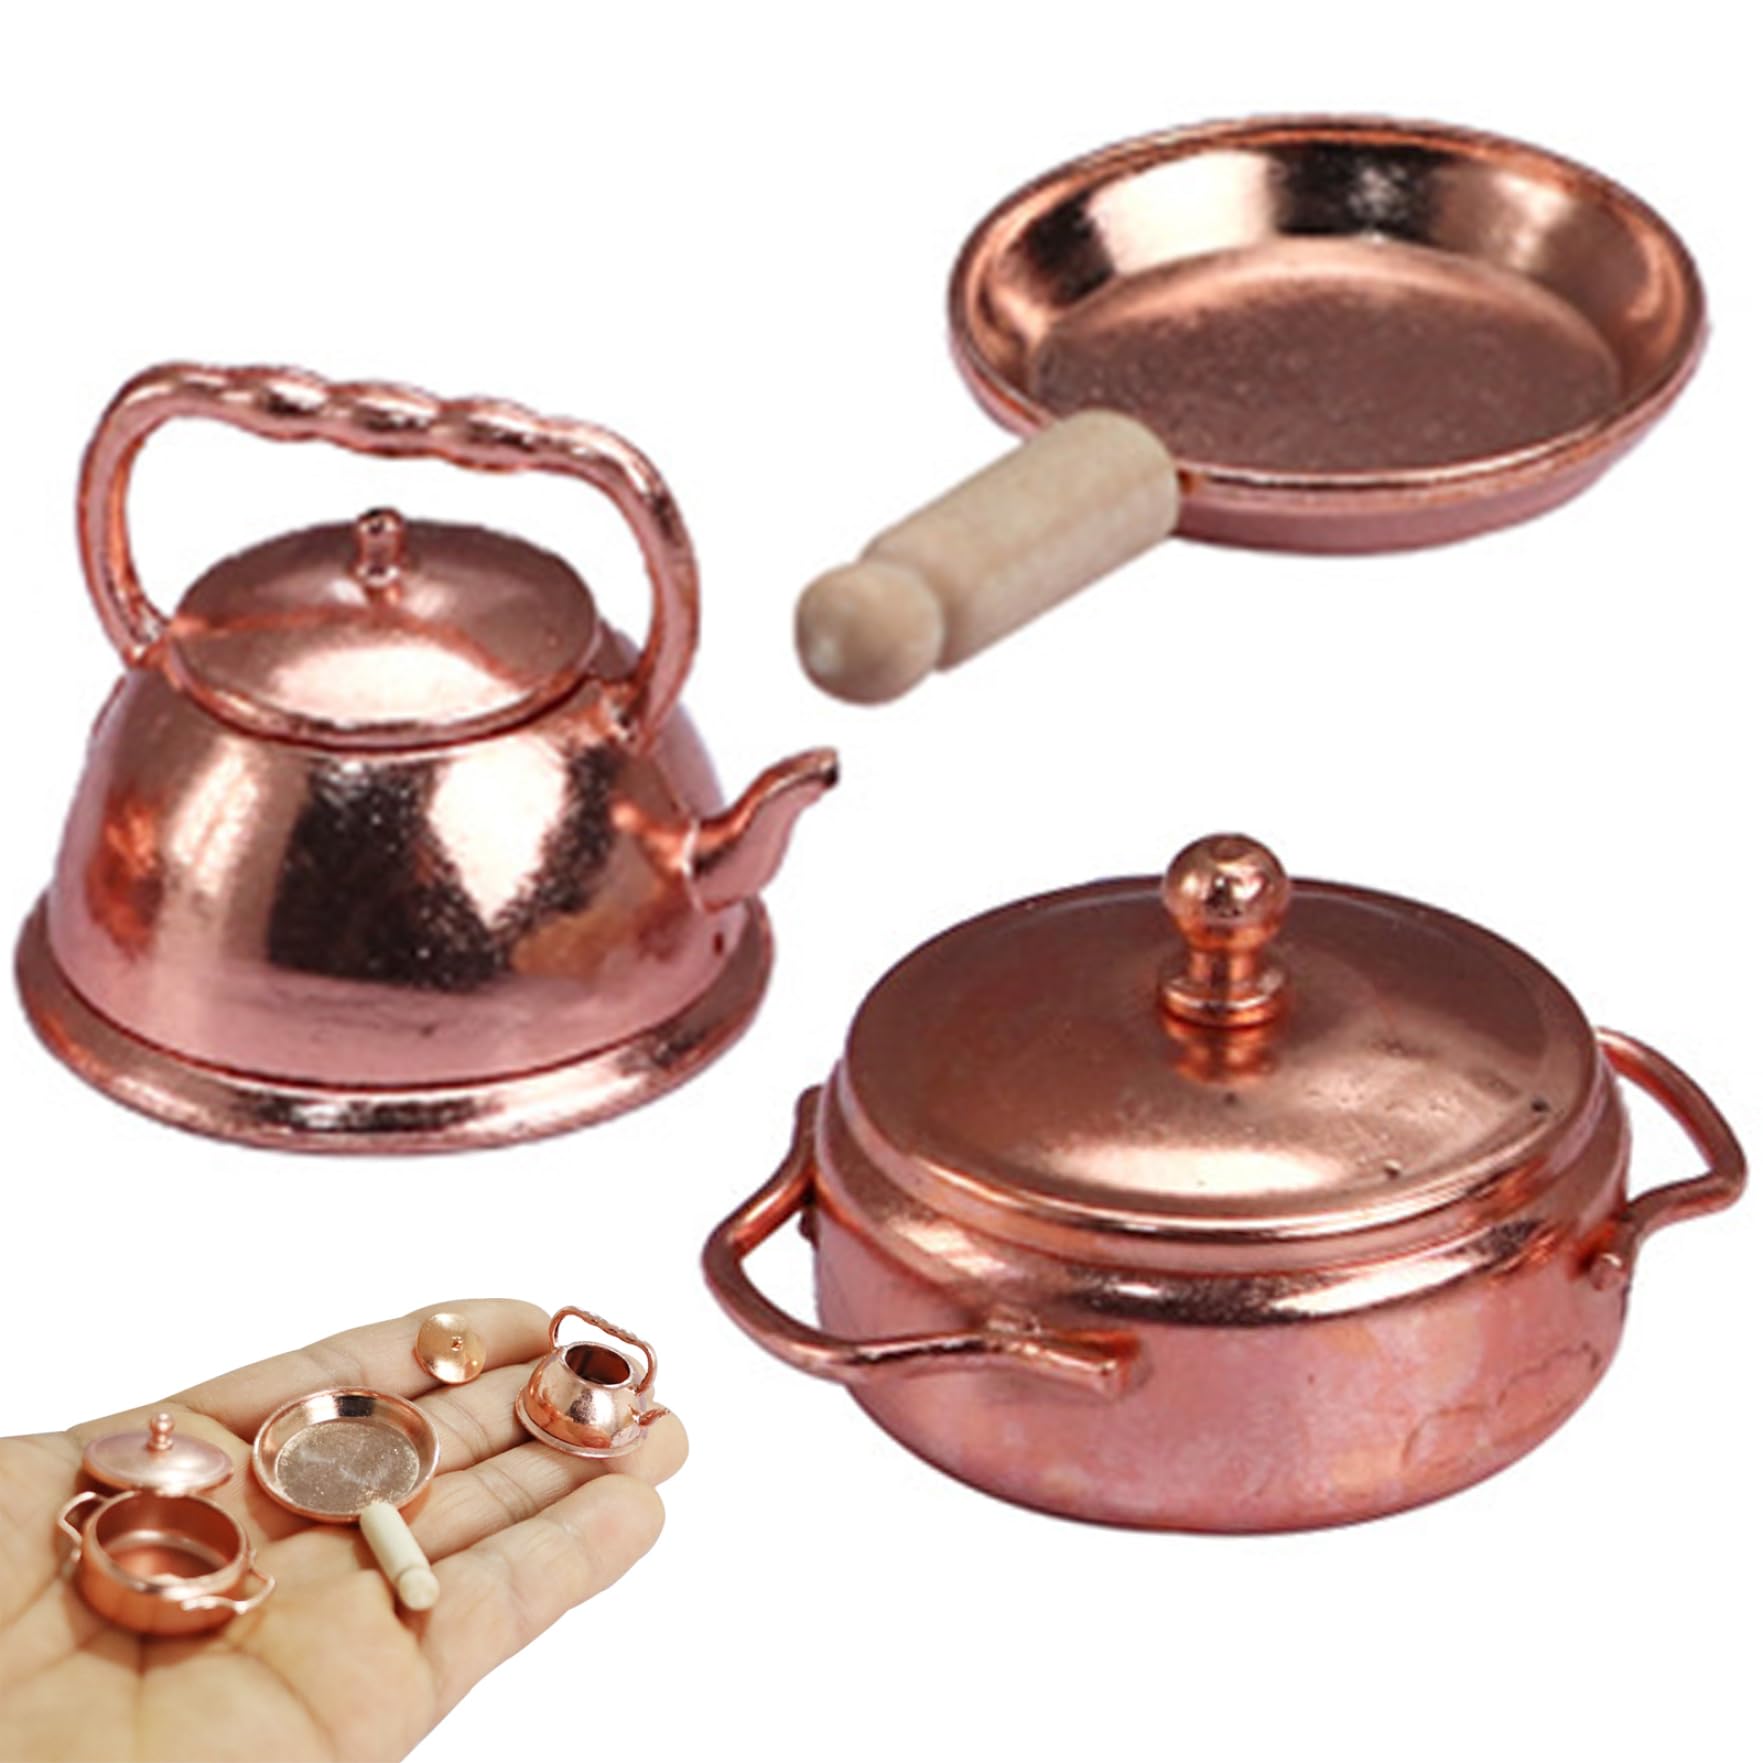 Mini Pots and Pans with a Kettle for 1:12 Dollhouse Kitchen Accessories Alloy Mini Kitchen Set Doll House Miniatures Items for Dollhouse Decorations1 Frying Pan 1 Kettle 1 Double Ear Pot